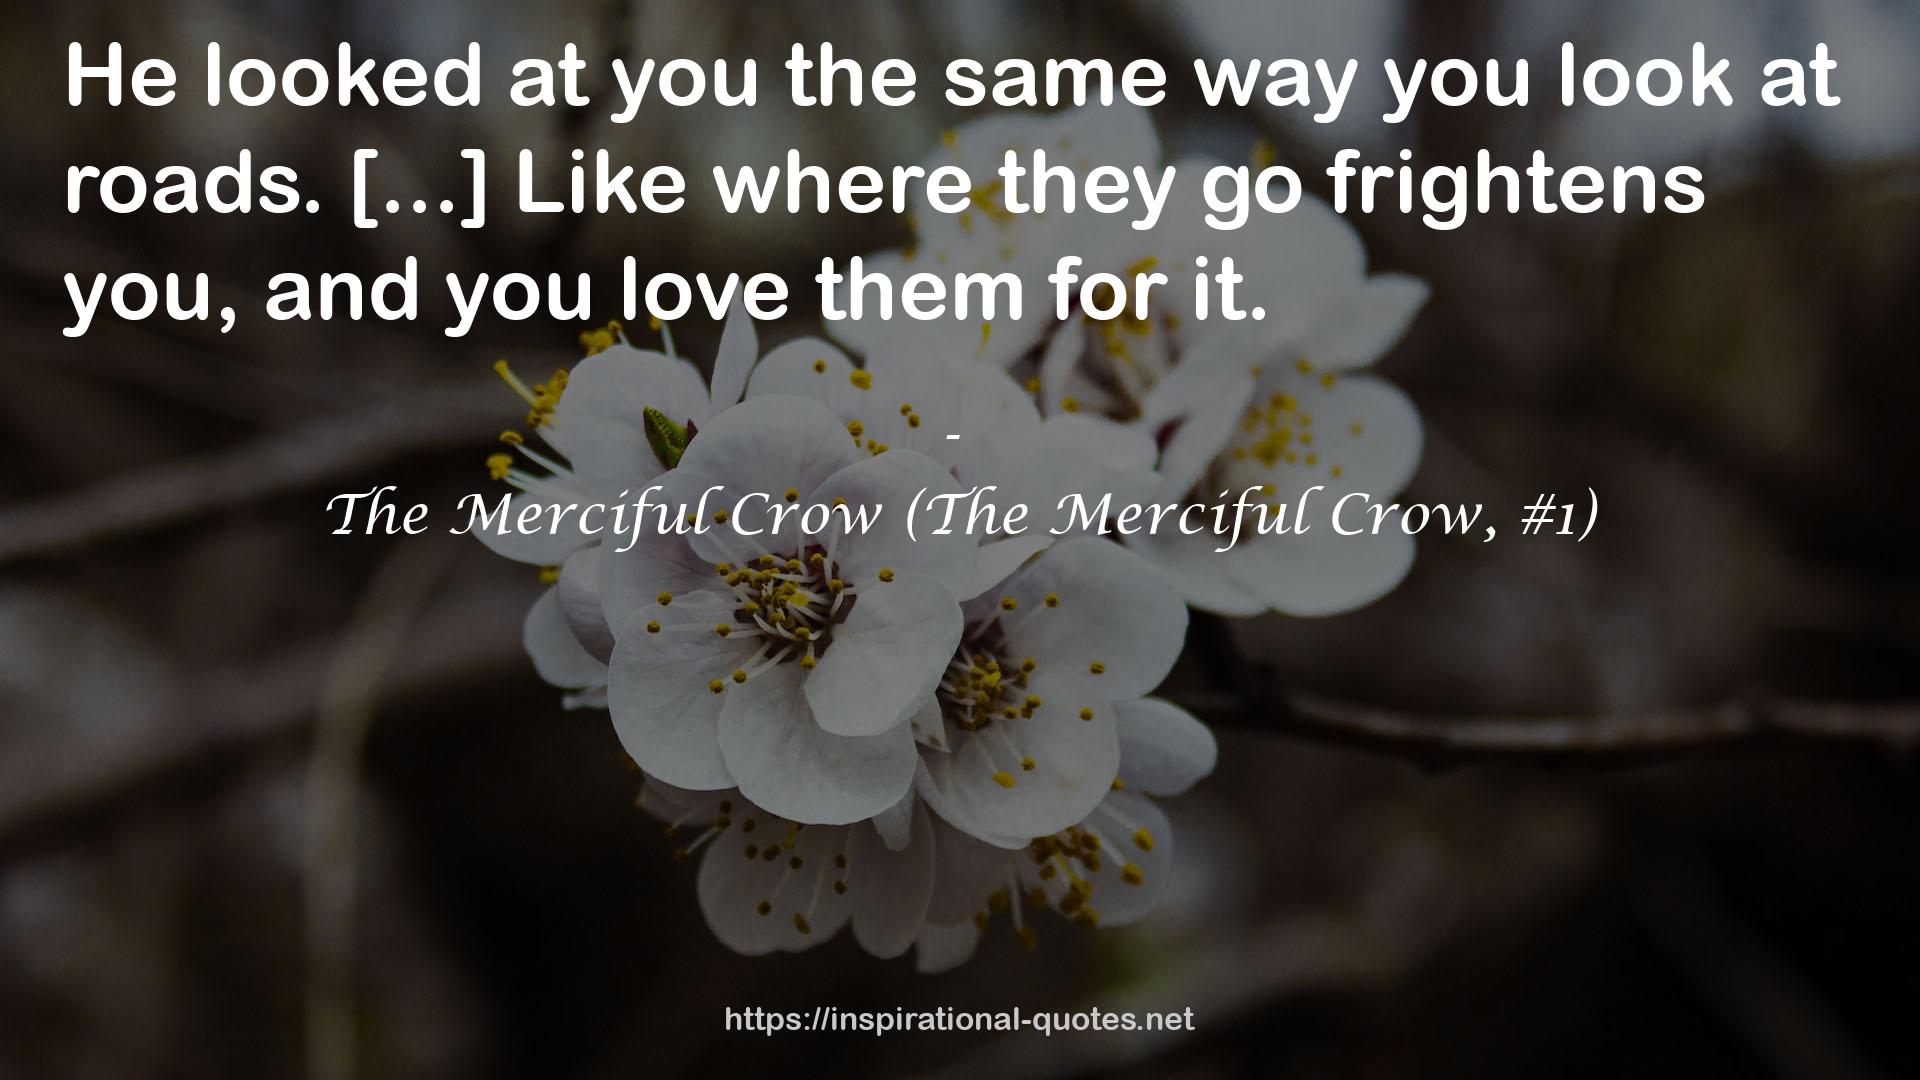 The Merciful Crow (The Merciful Crow, #1) QUOTES